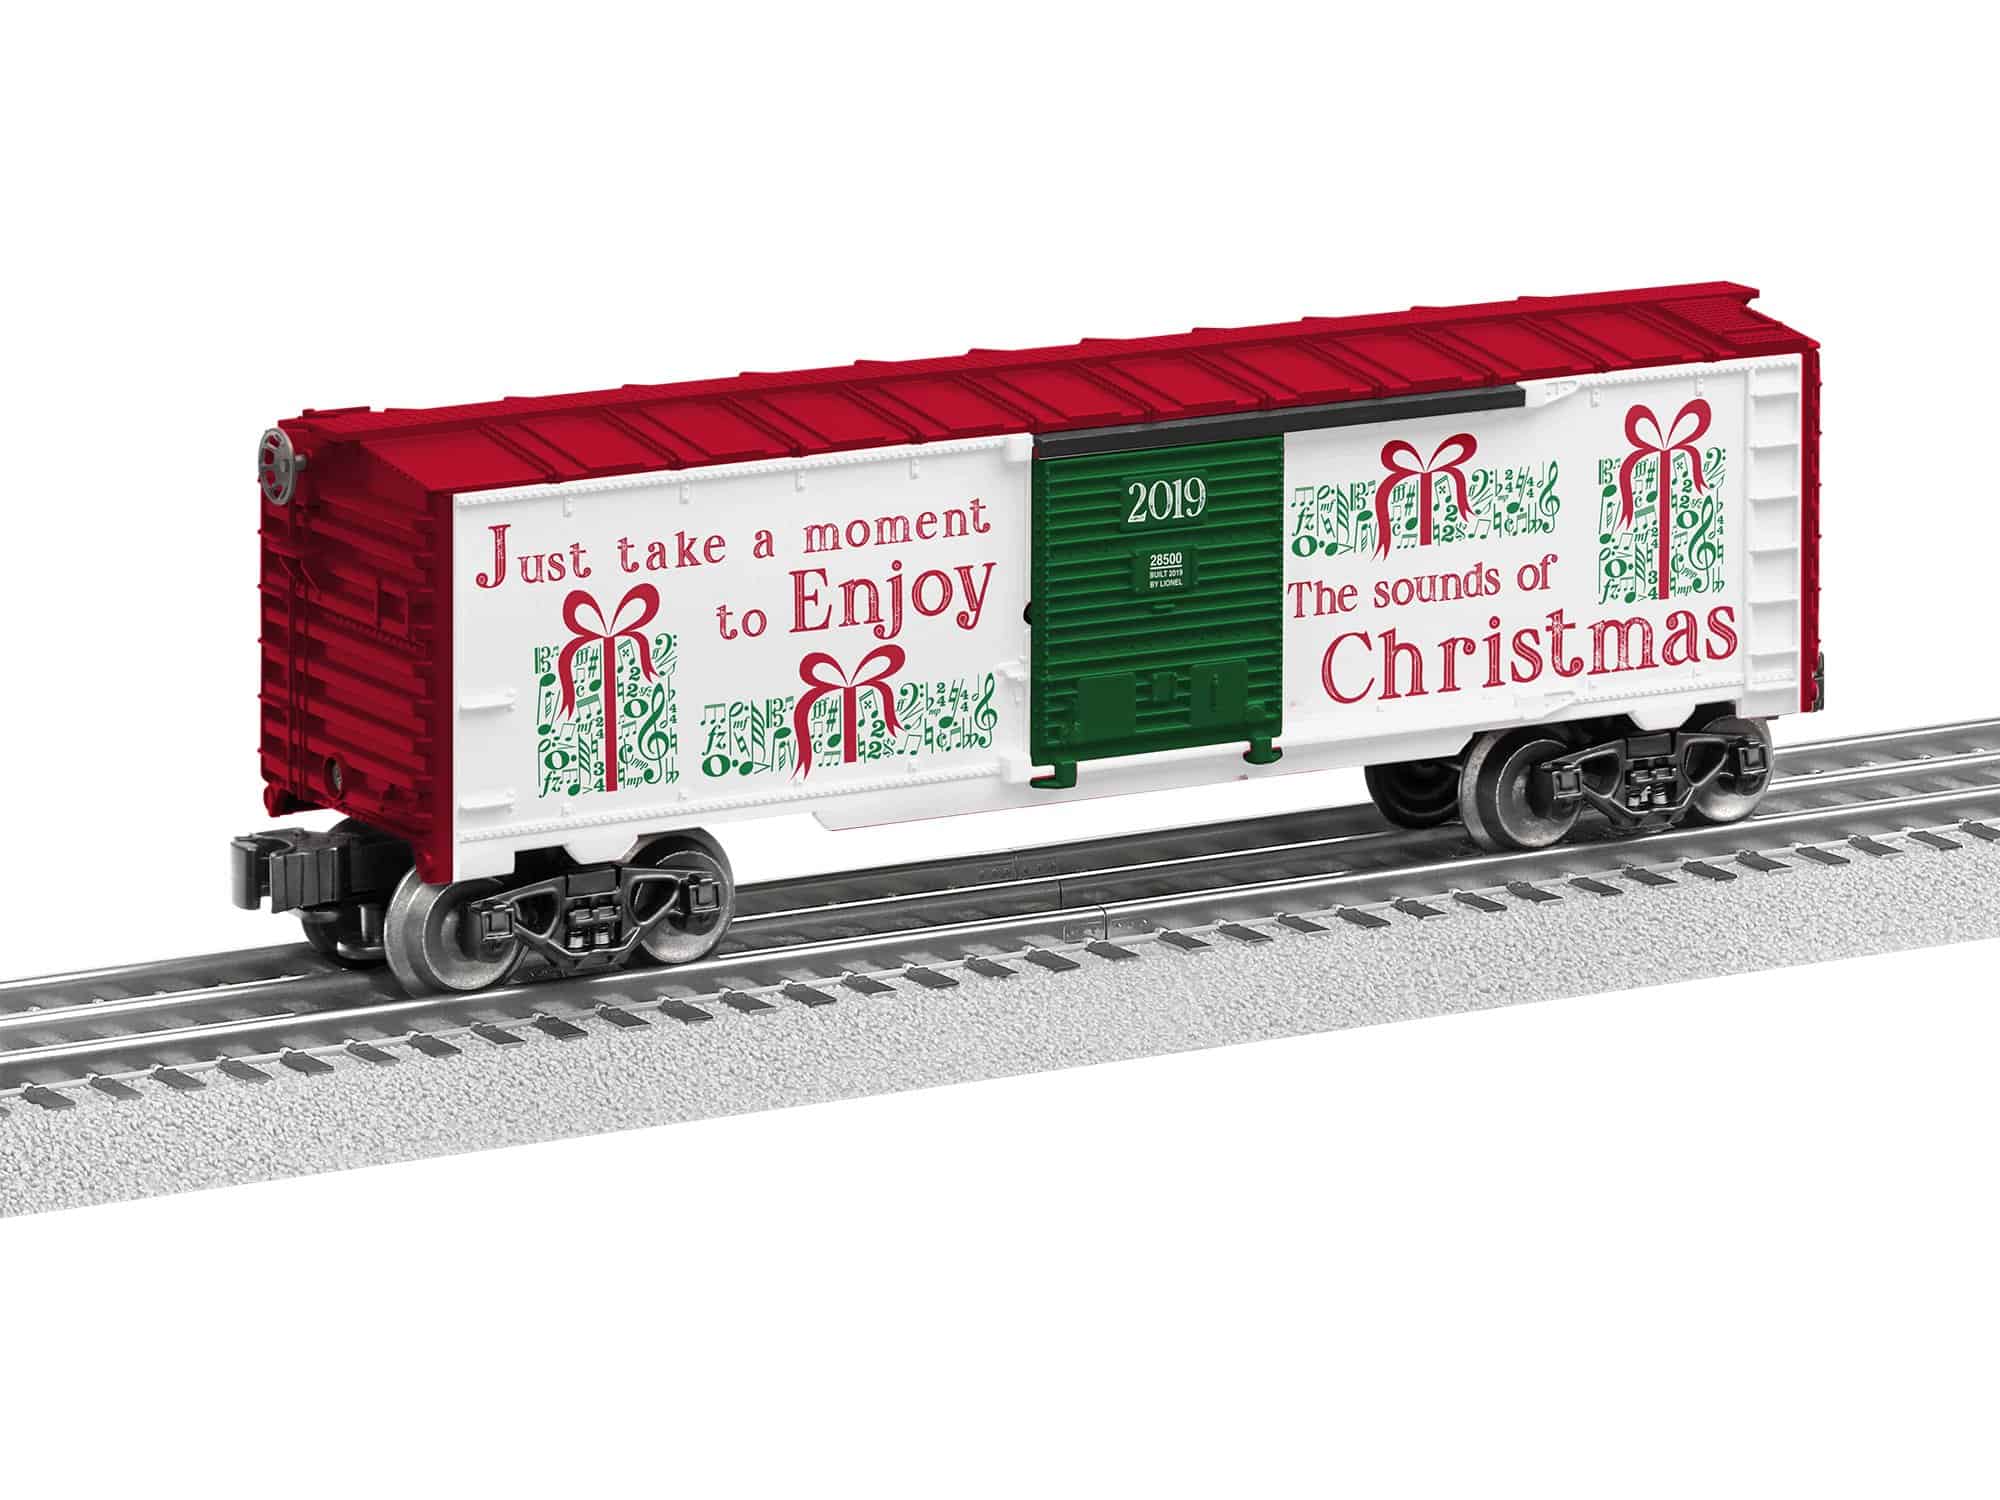 Lionel 1928500 - Music Boxcar "Christmas" #19 